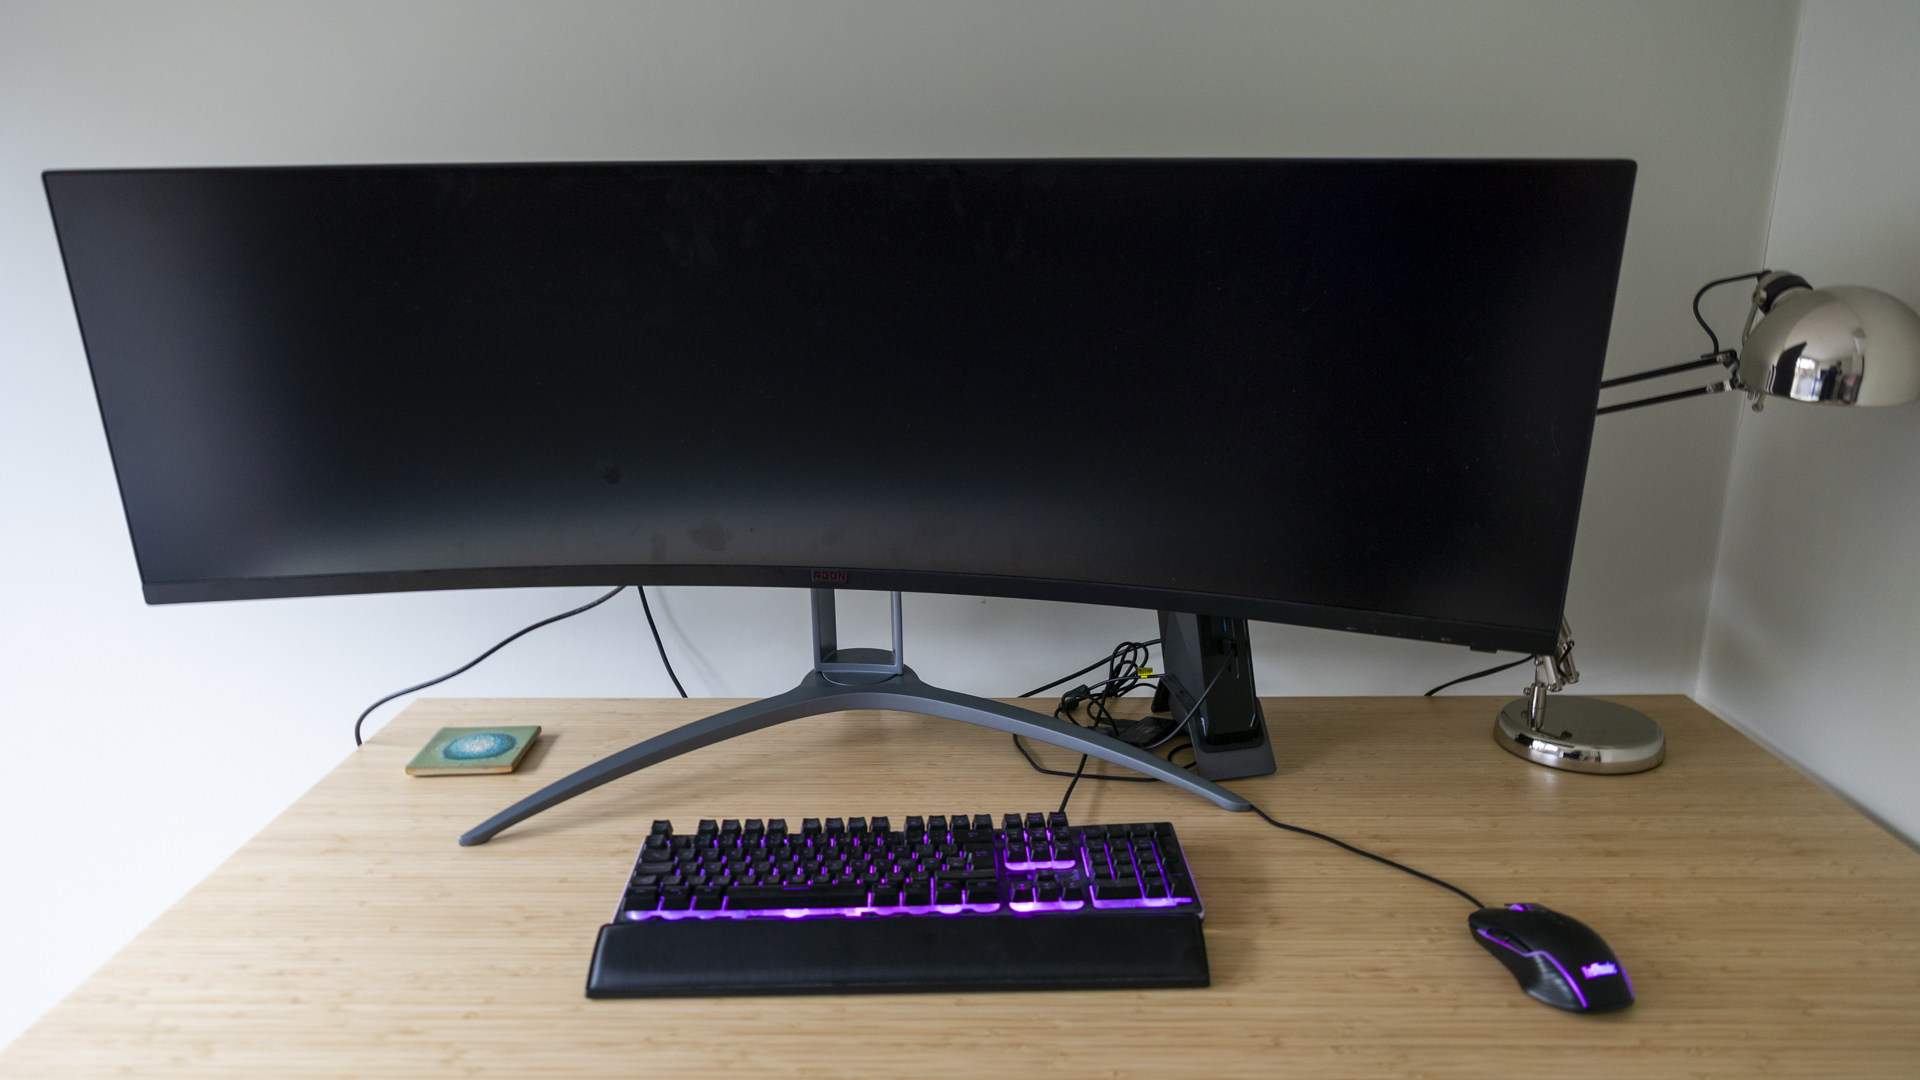 The AOC Agon AG493UCX2 monitor on a bamboo desk with the screen off